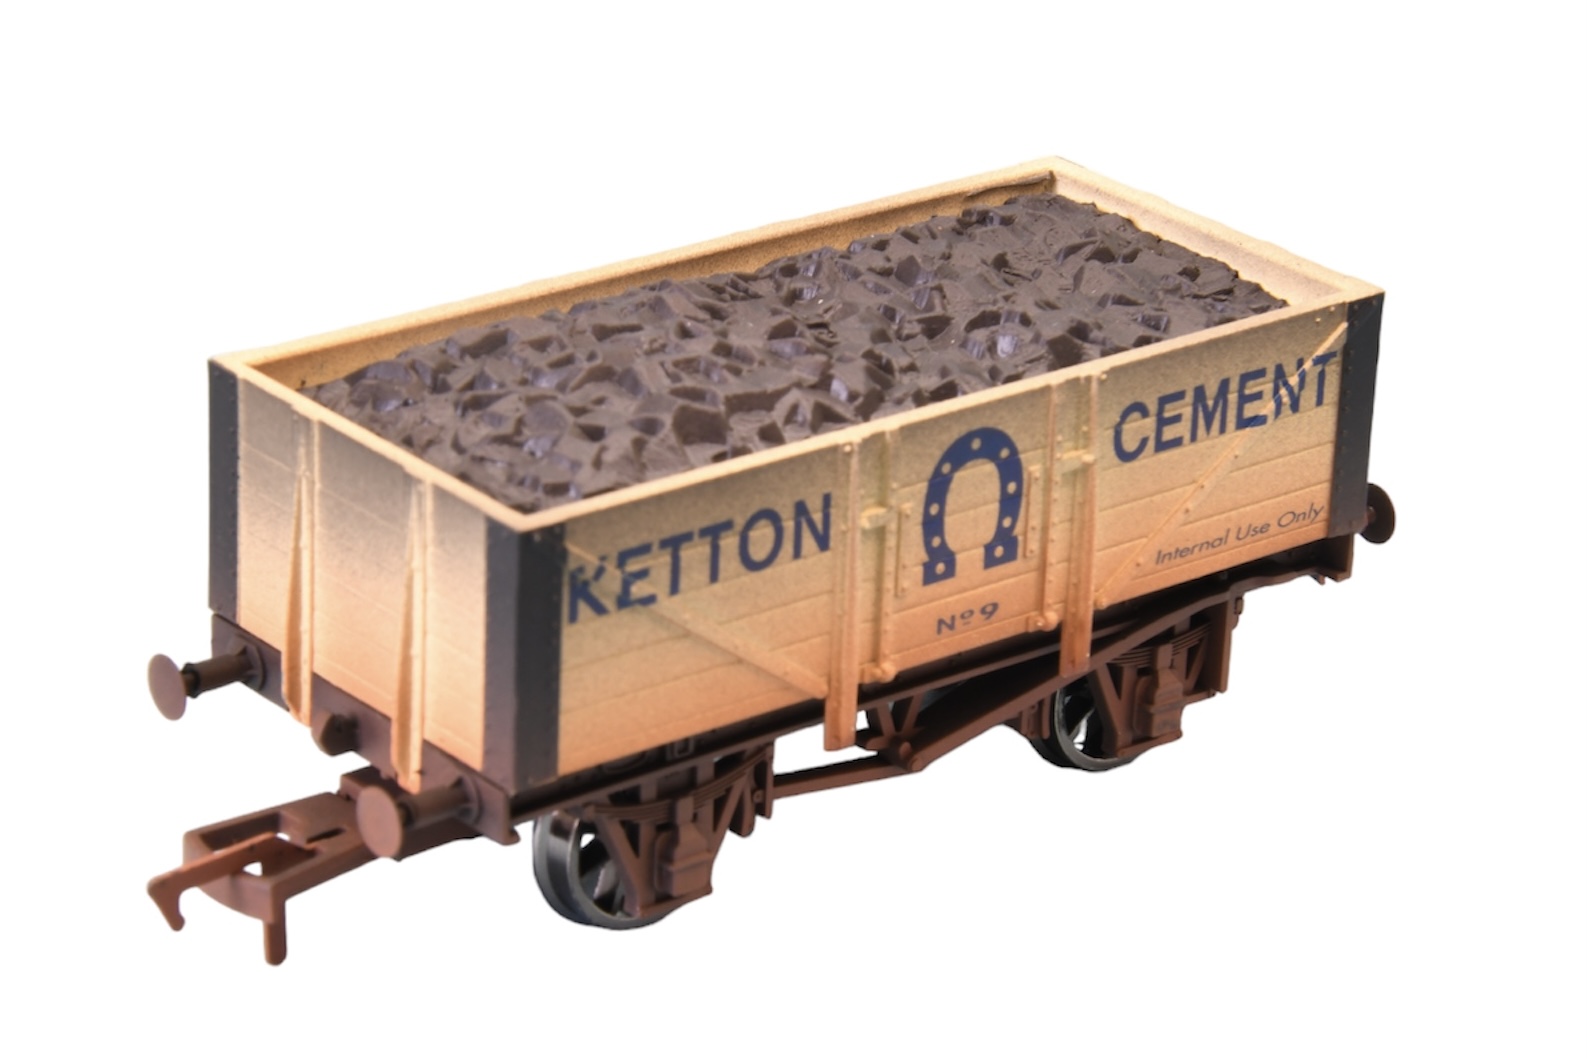 4F-051-008 5 PLANK WAGON KETTON CEMENT WEATHERED